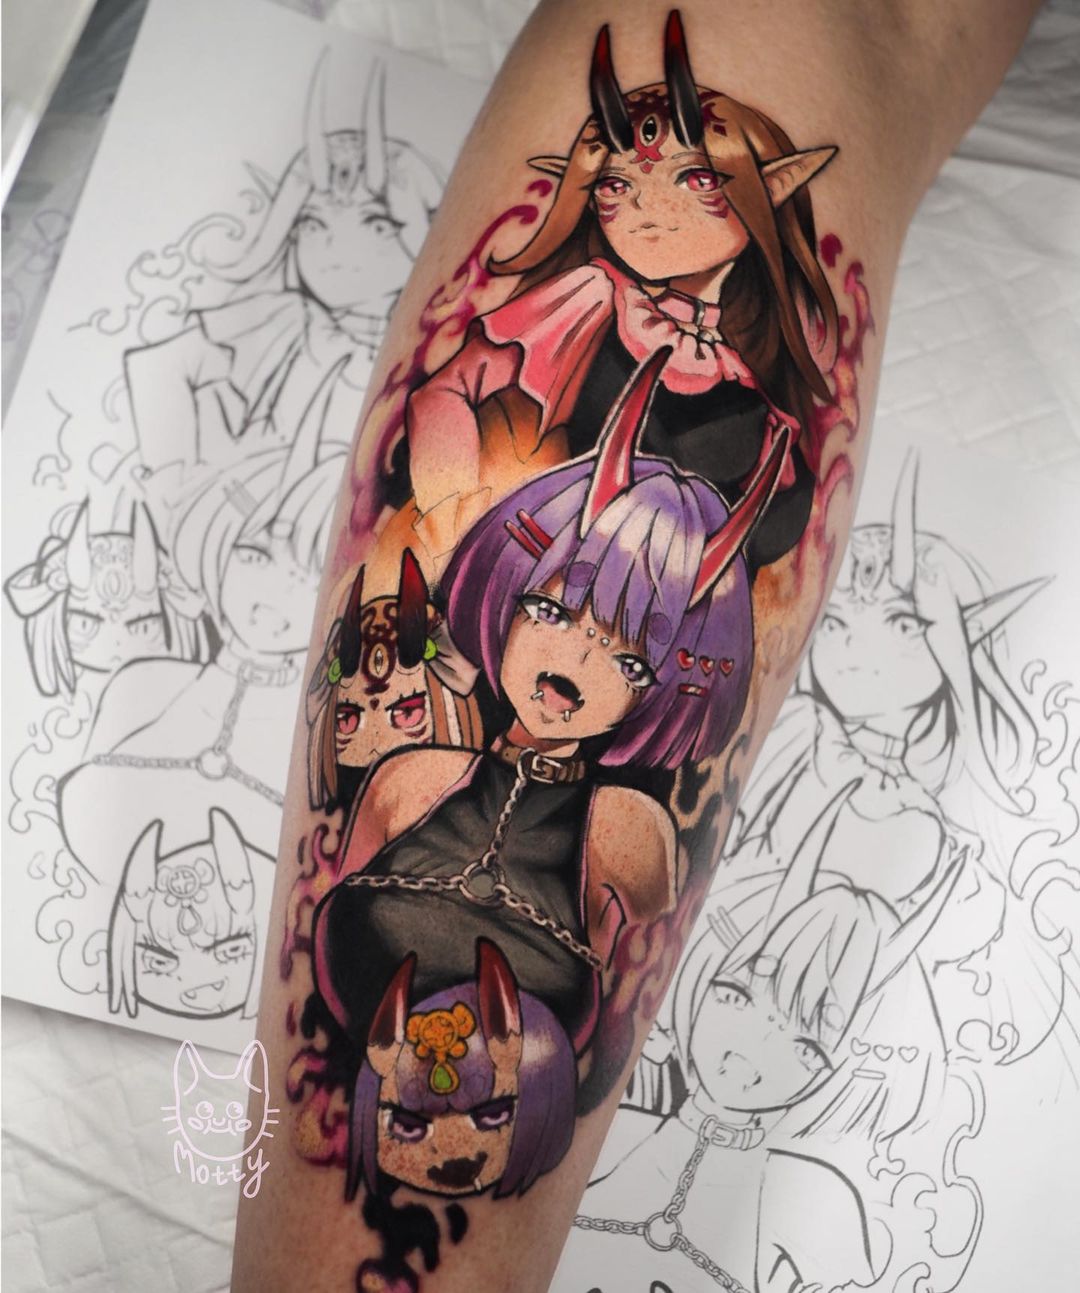 When it comes to anime or Manga Tattoos in Colorado, Tashy is blowing  people away - Rooster Magazine